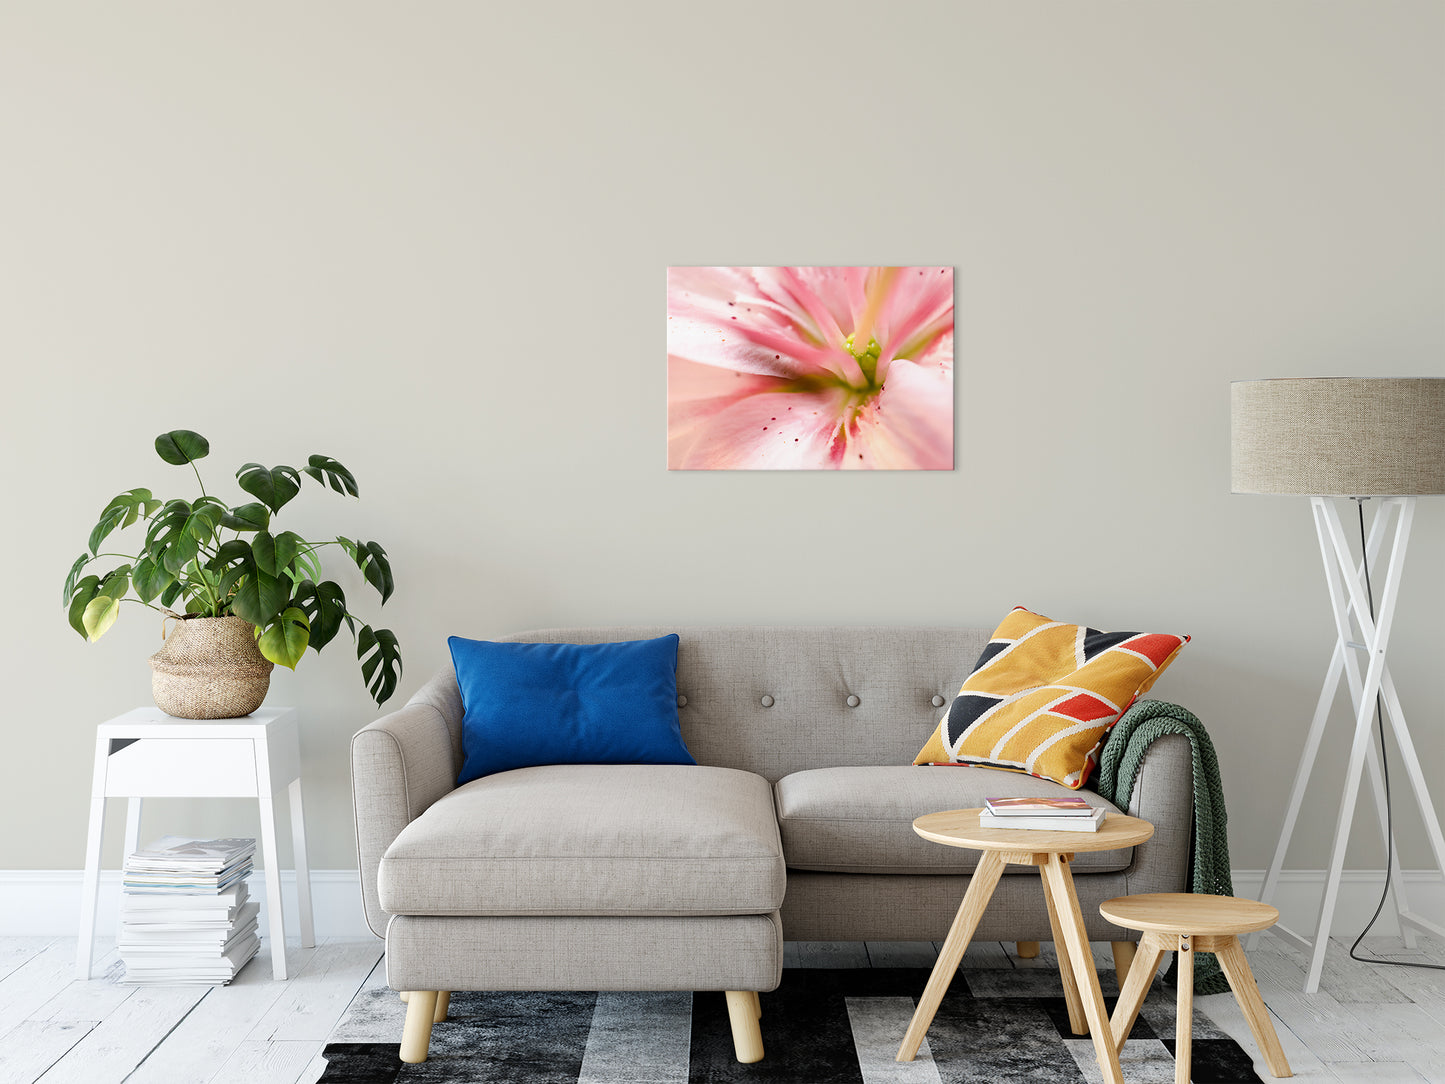 Center of the Stargazer Lily Nature / Floral Photo Fine Art Canvas Wall Art Prints 20" x 30" - PIPAFINEART